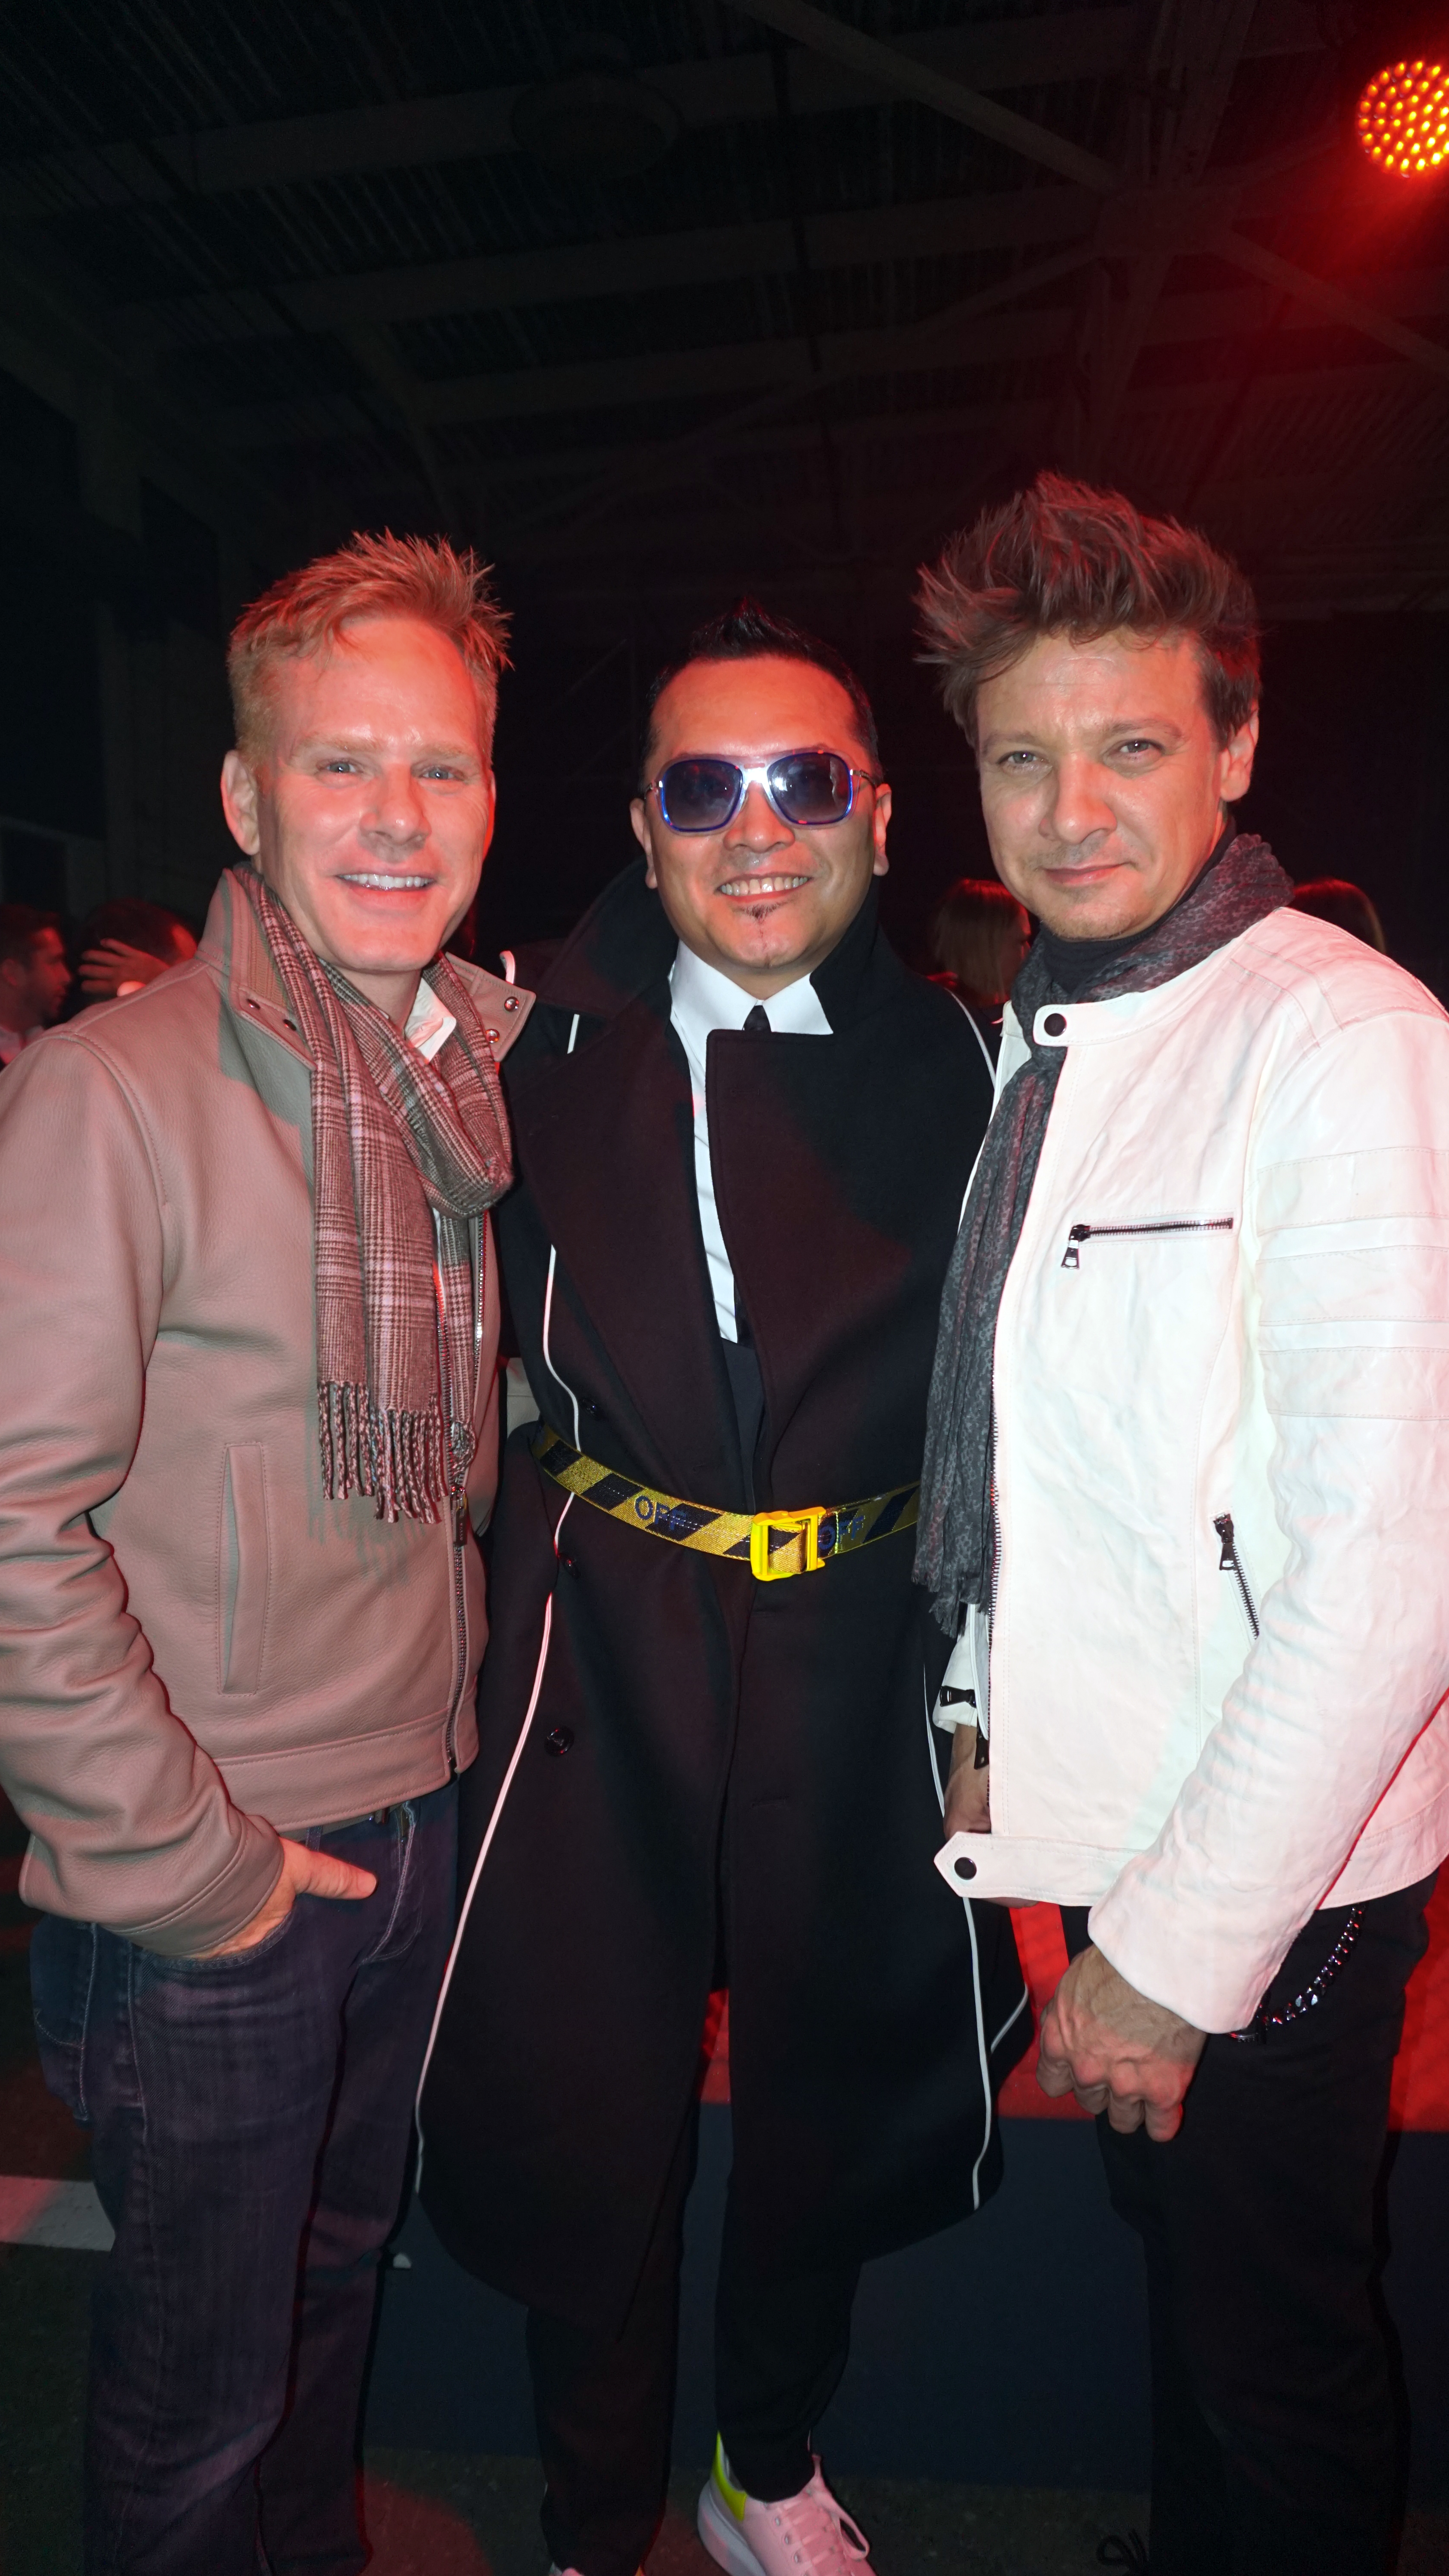 Gordon hangs out with dear old friends Kristoffer Winters and Jeremy Renner at the star-studded Cartier party, naturally